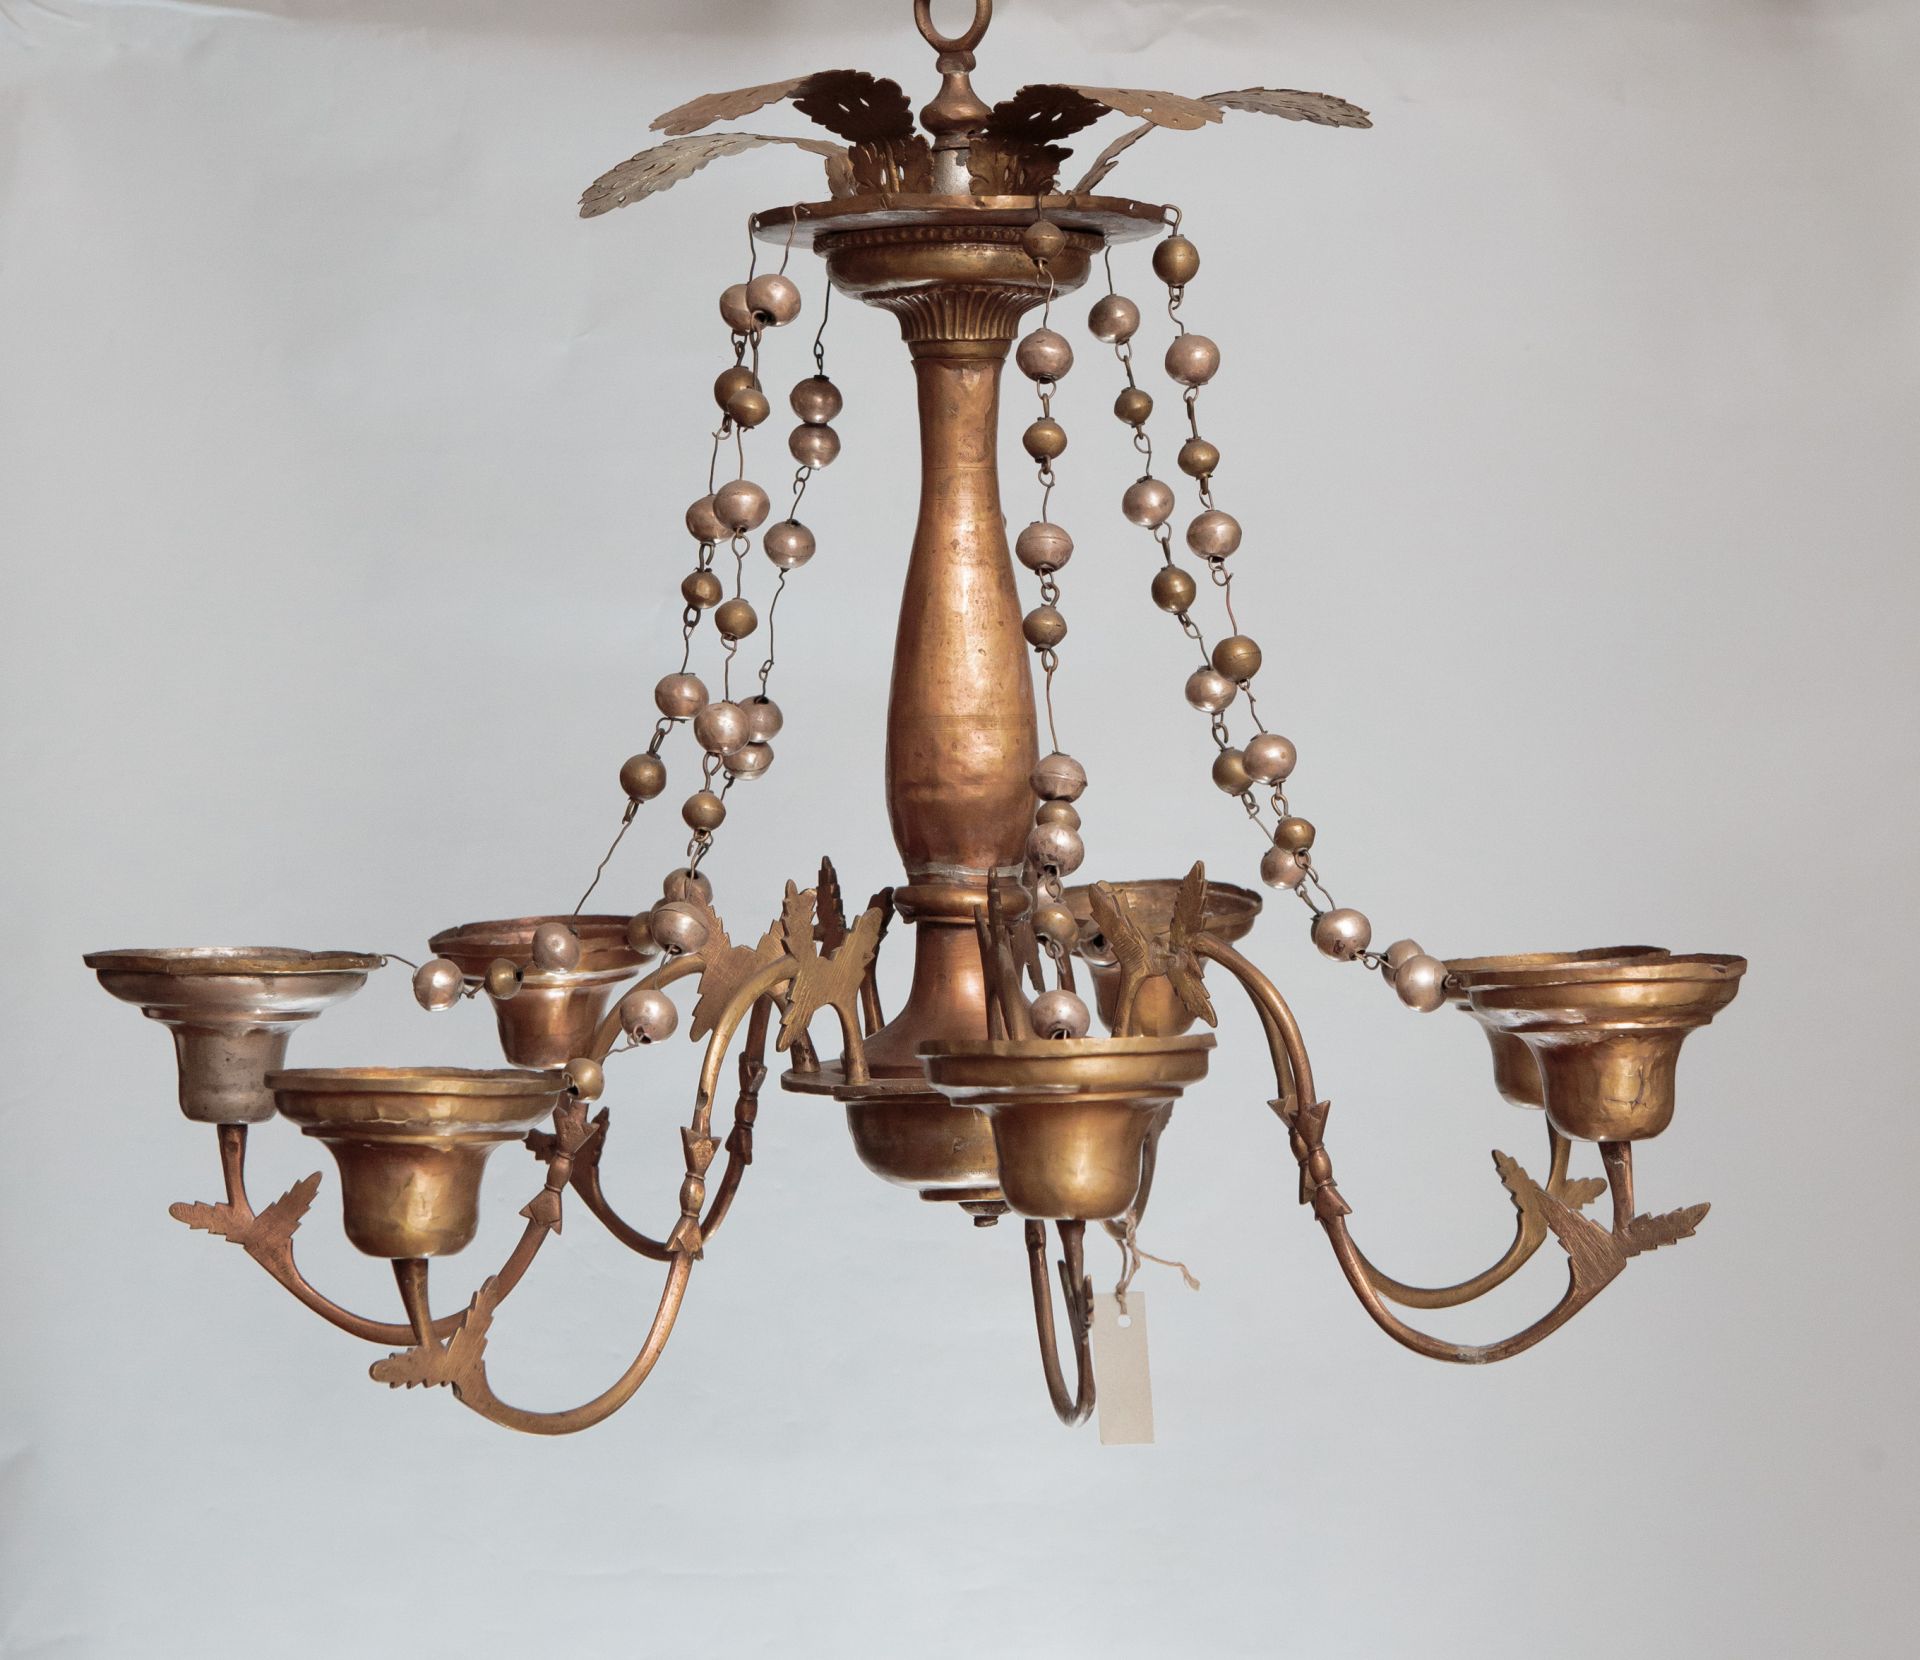 Chandelier, 1800–1825, Lithuanian National Museum of Art, TM-523. Photo by Tomas Kapočius, 2017